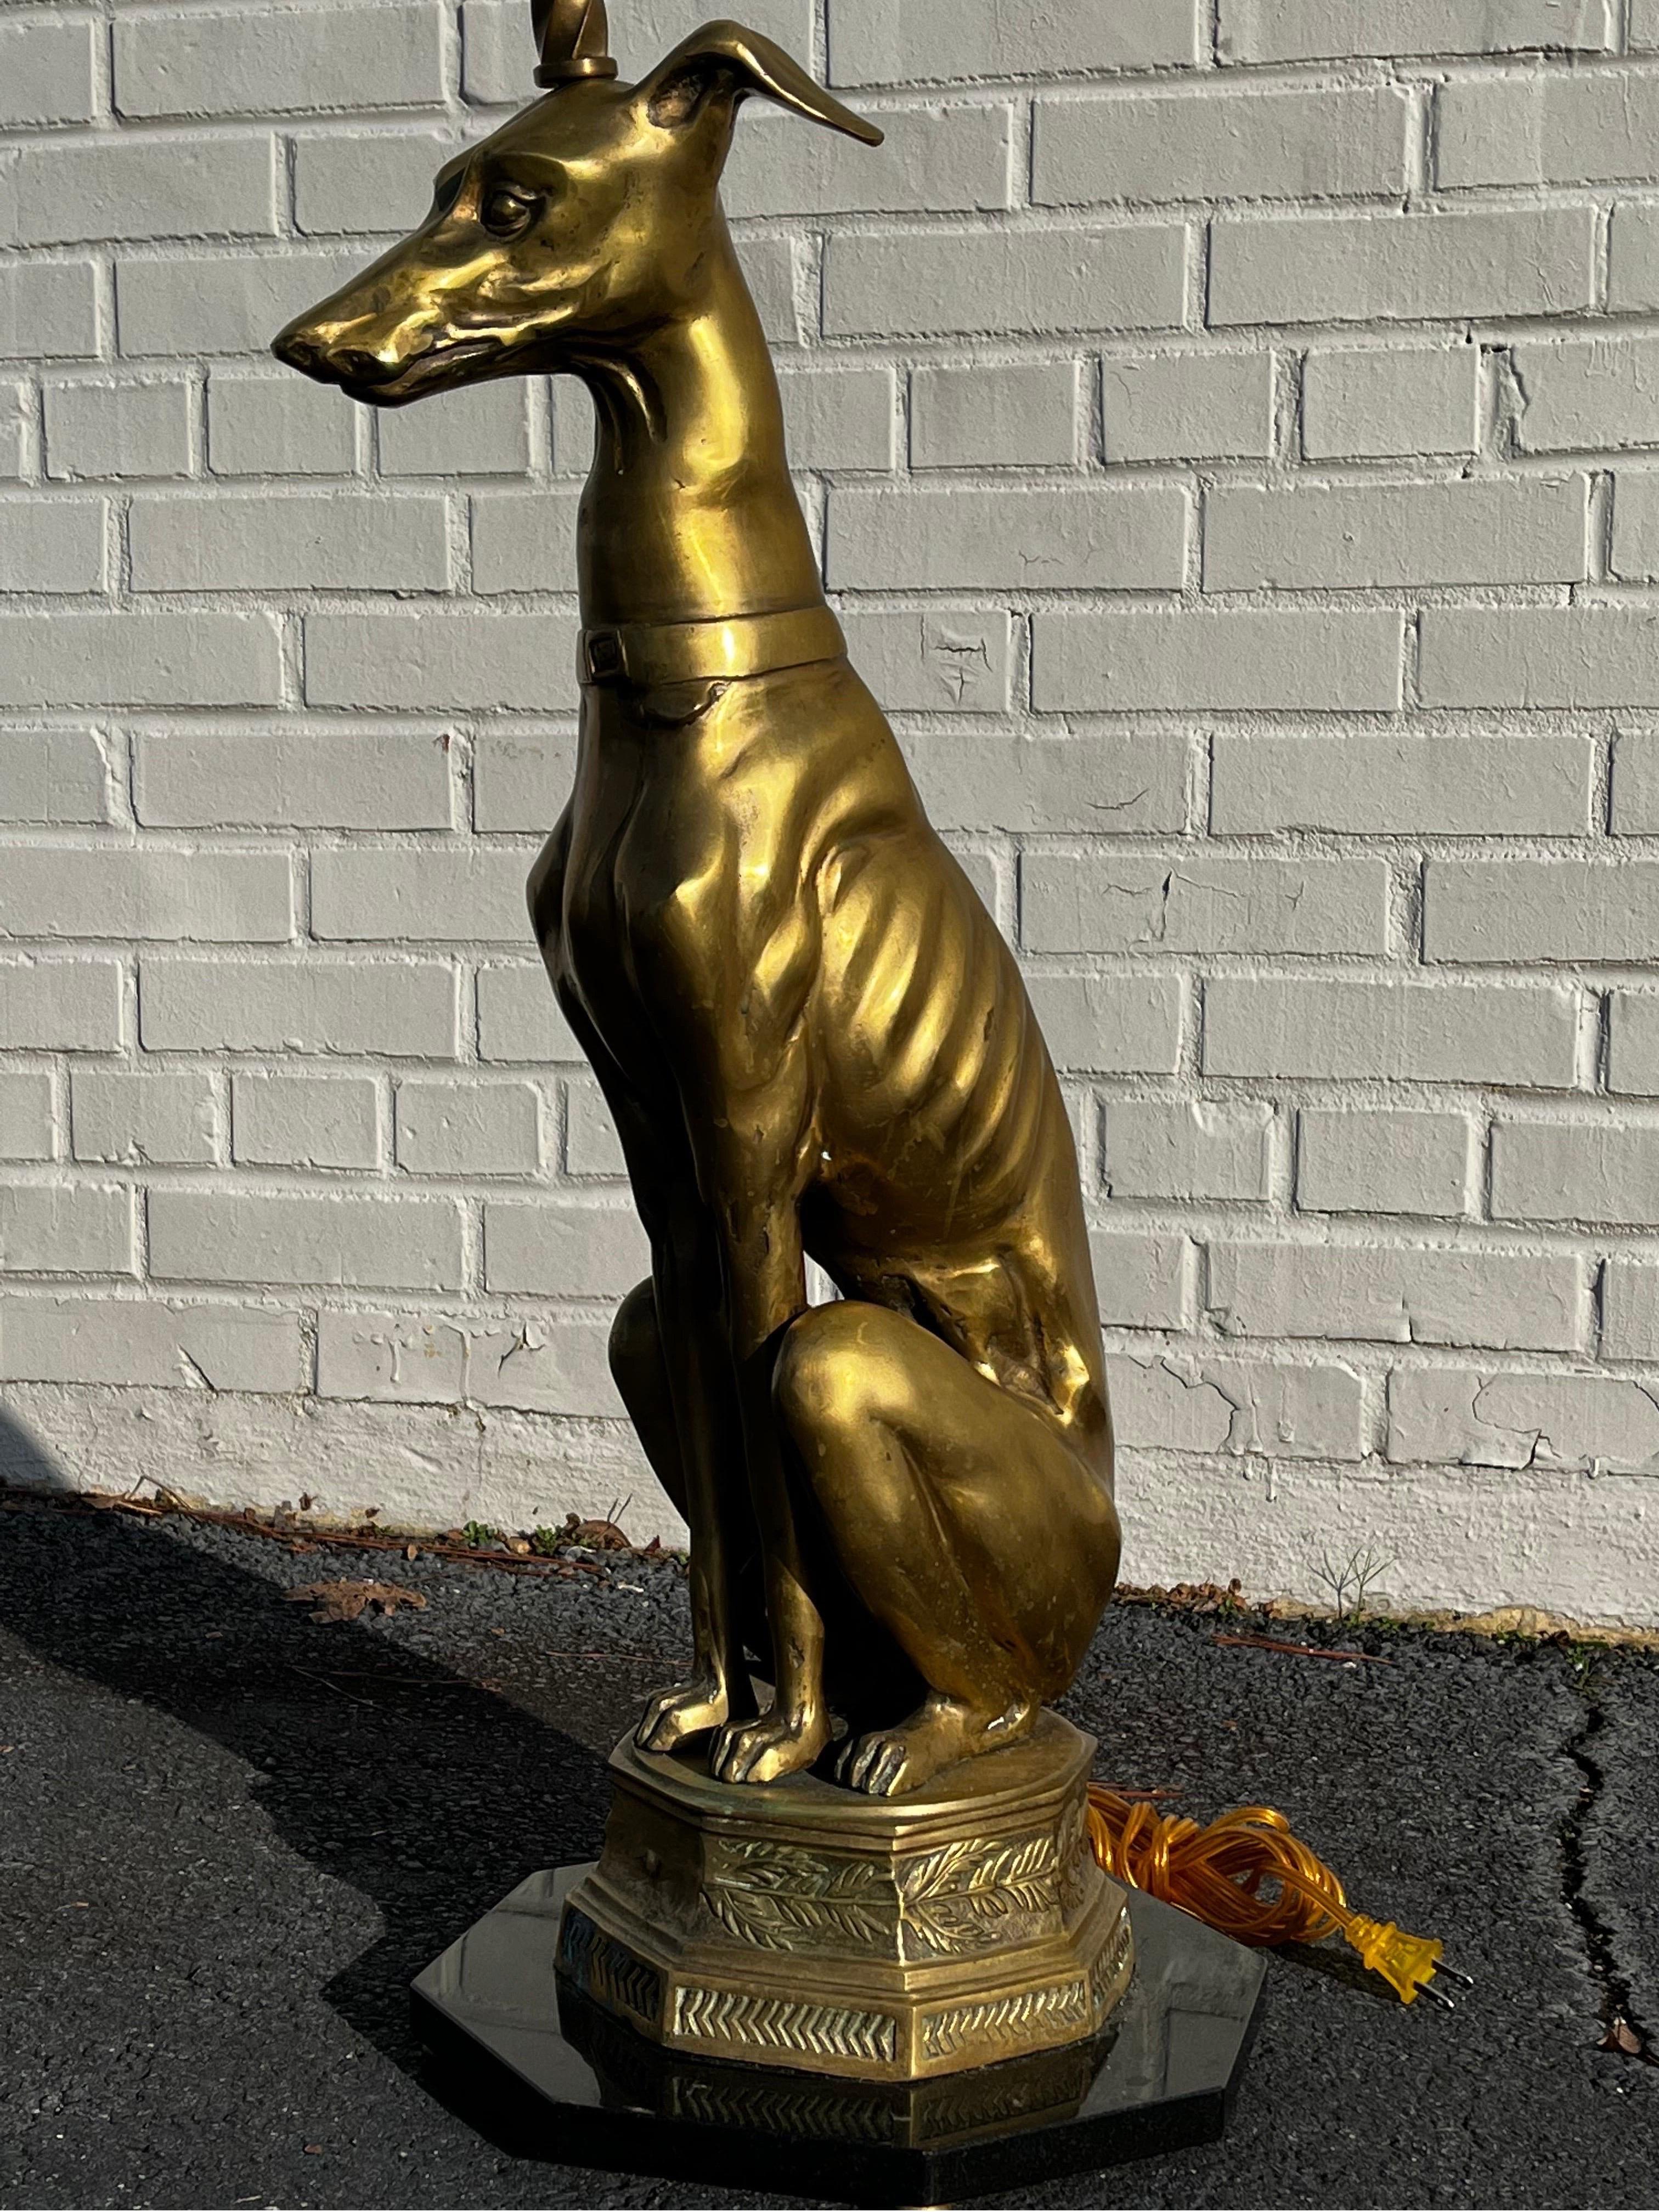 A mid 20th century cast brass sculpture of a seated Greyhound / Whippet dog presented on an integral brass octagon shaped plinth style base with running leaf and geometric ornament. The sculpture is secured to an octagon shaped piece of polished